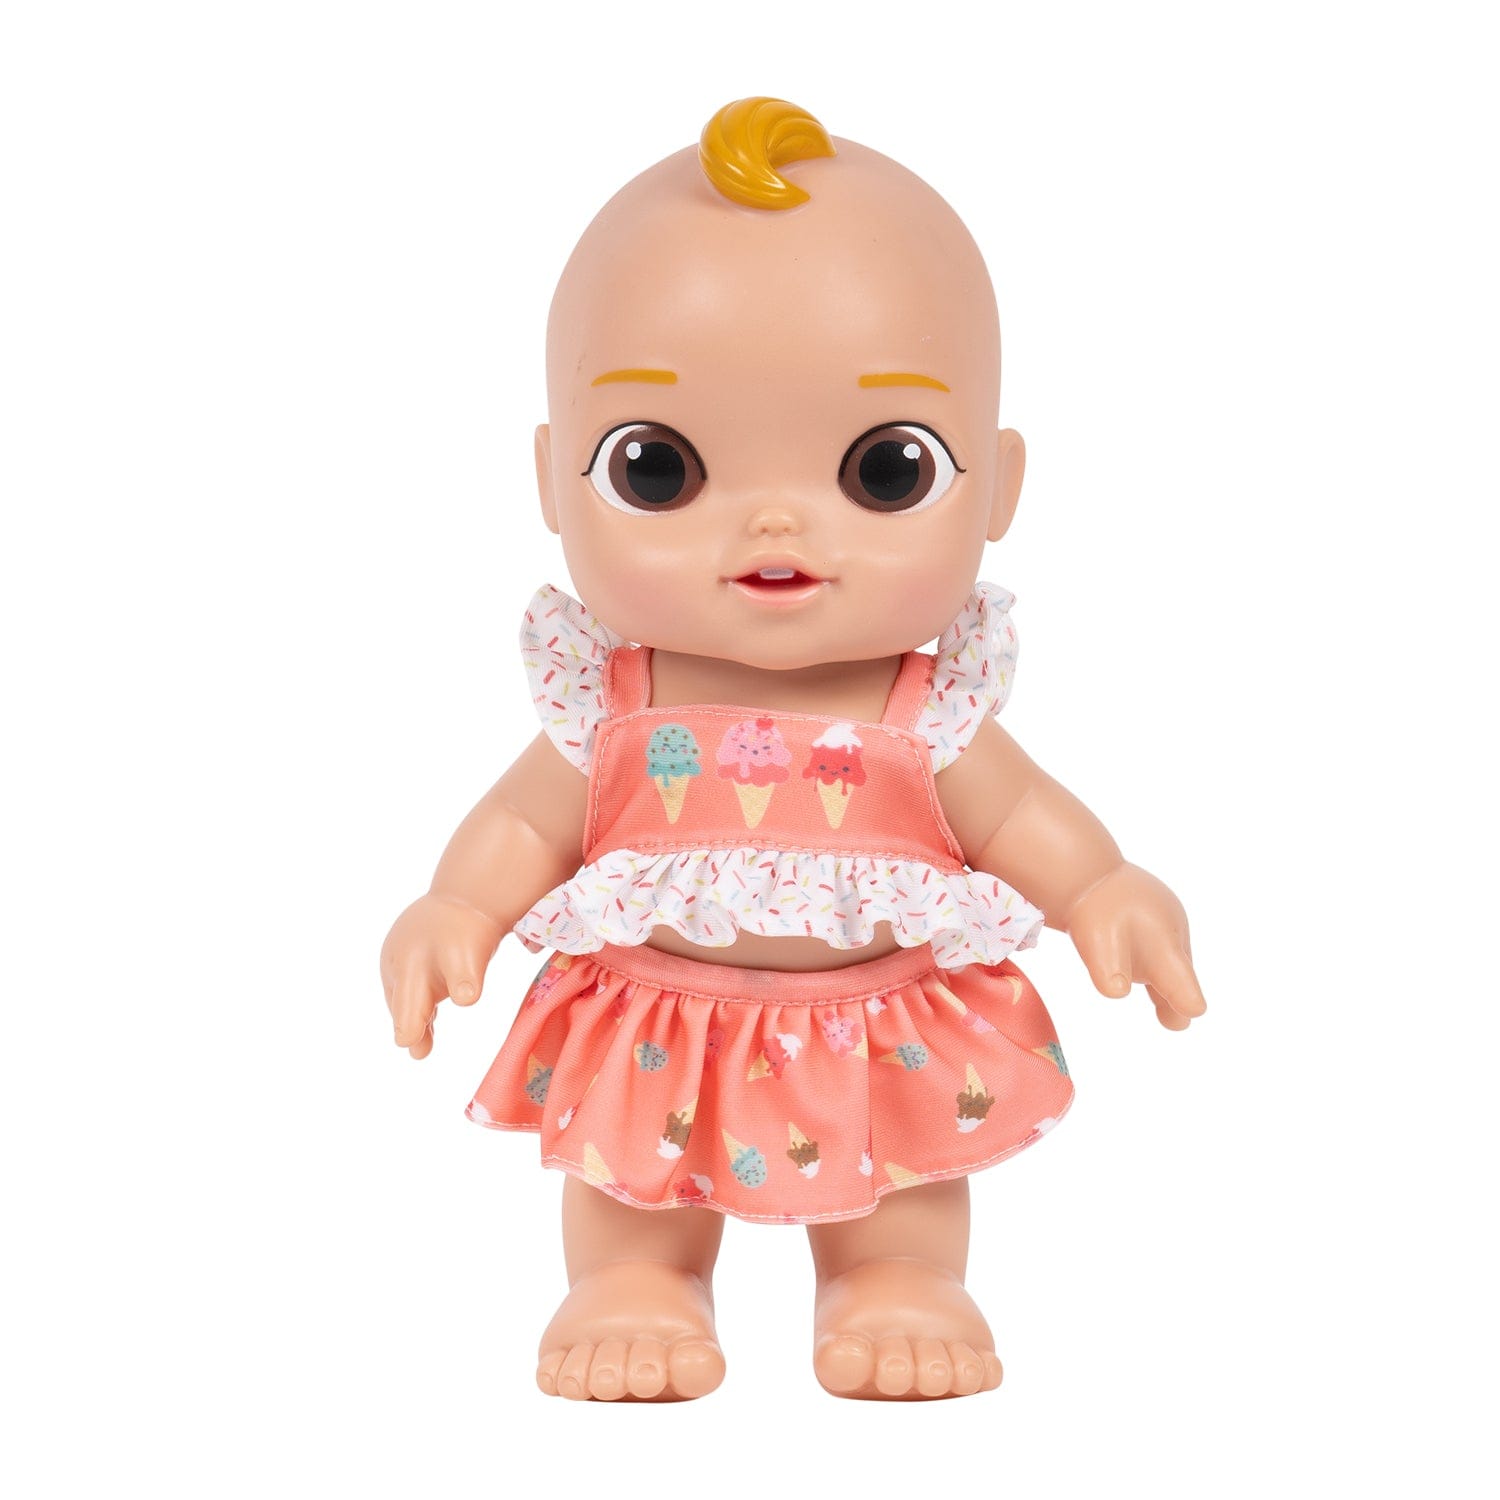 Adora Sun Smart Color-Changing Baby Doll & Doll Clothes Set - Sprinkles